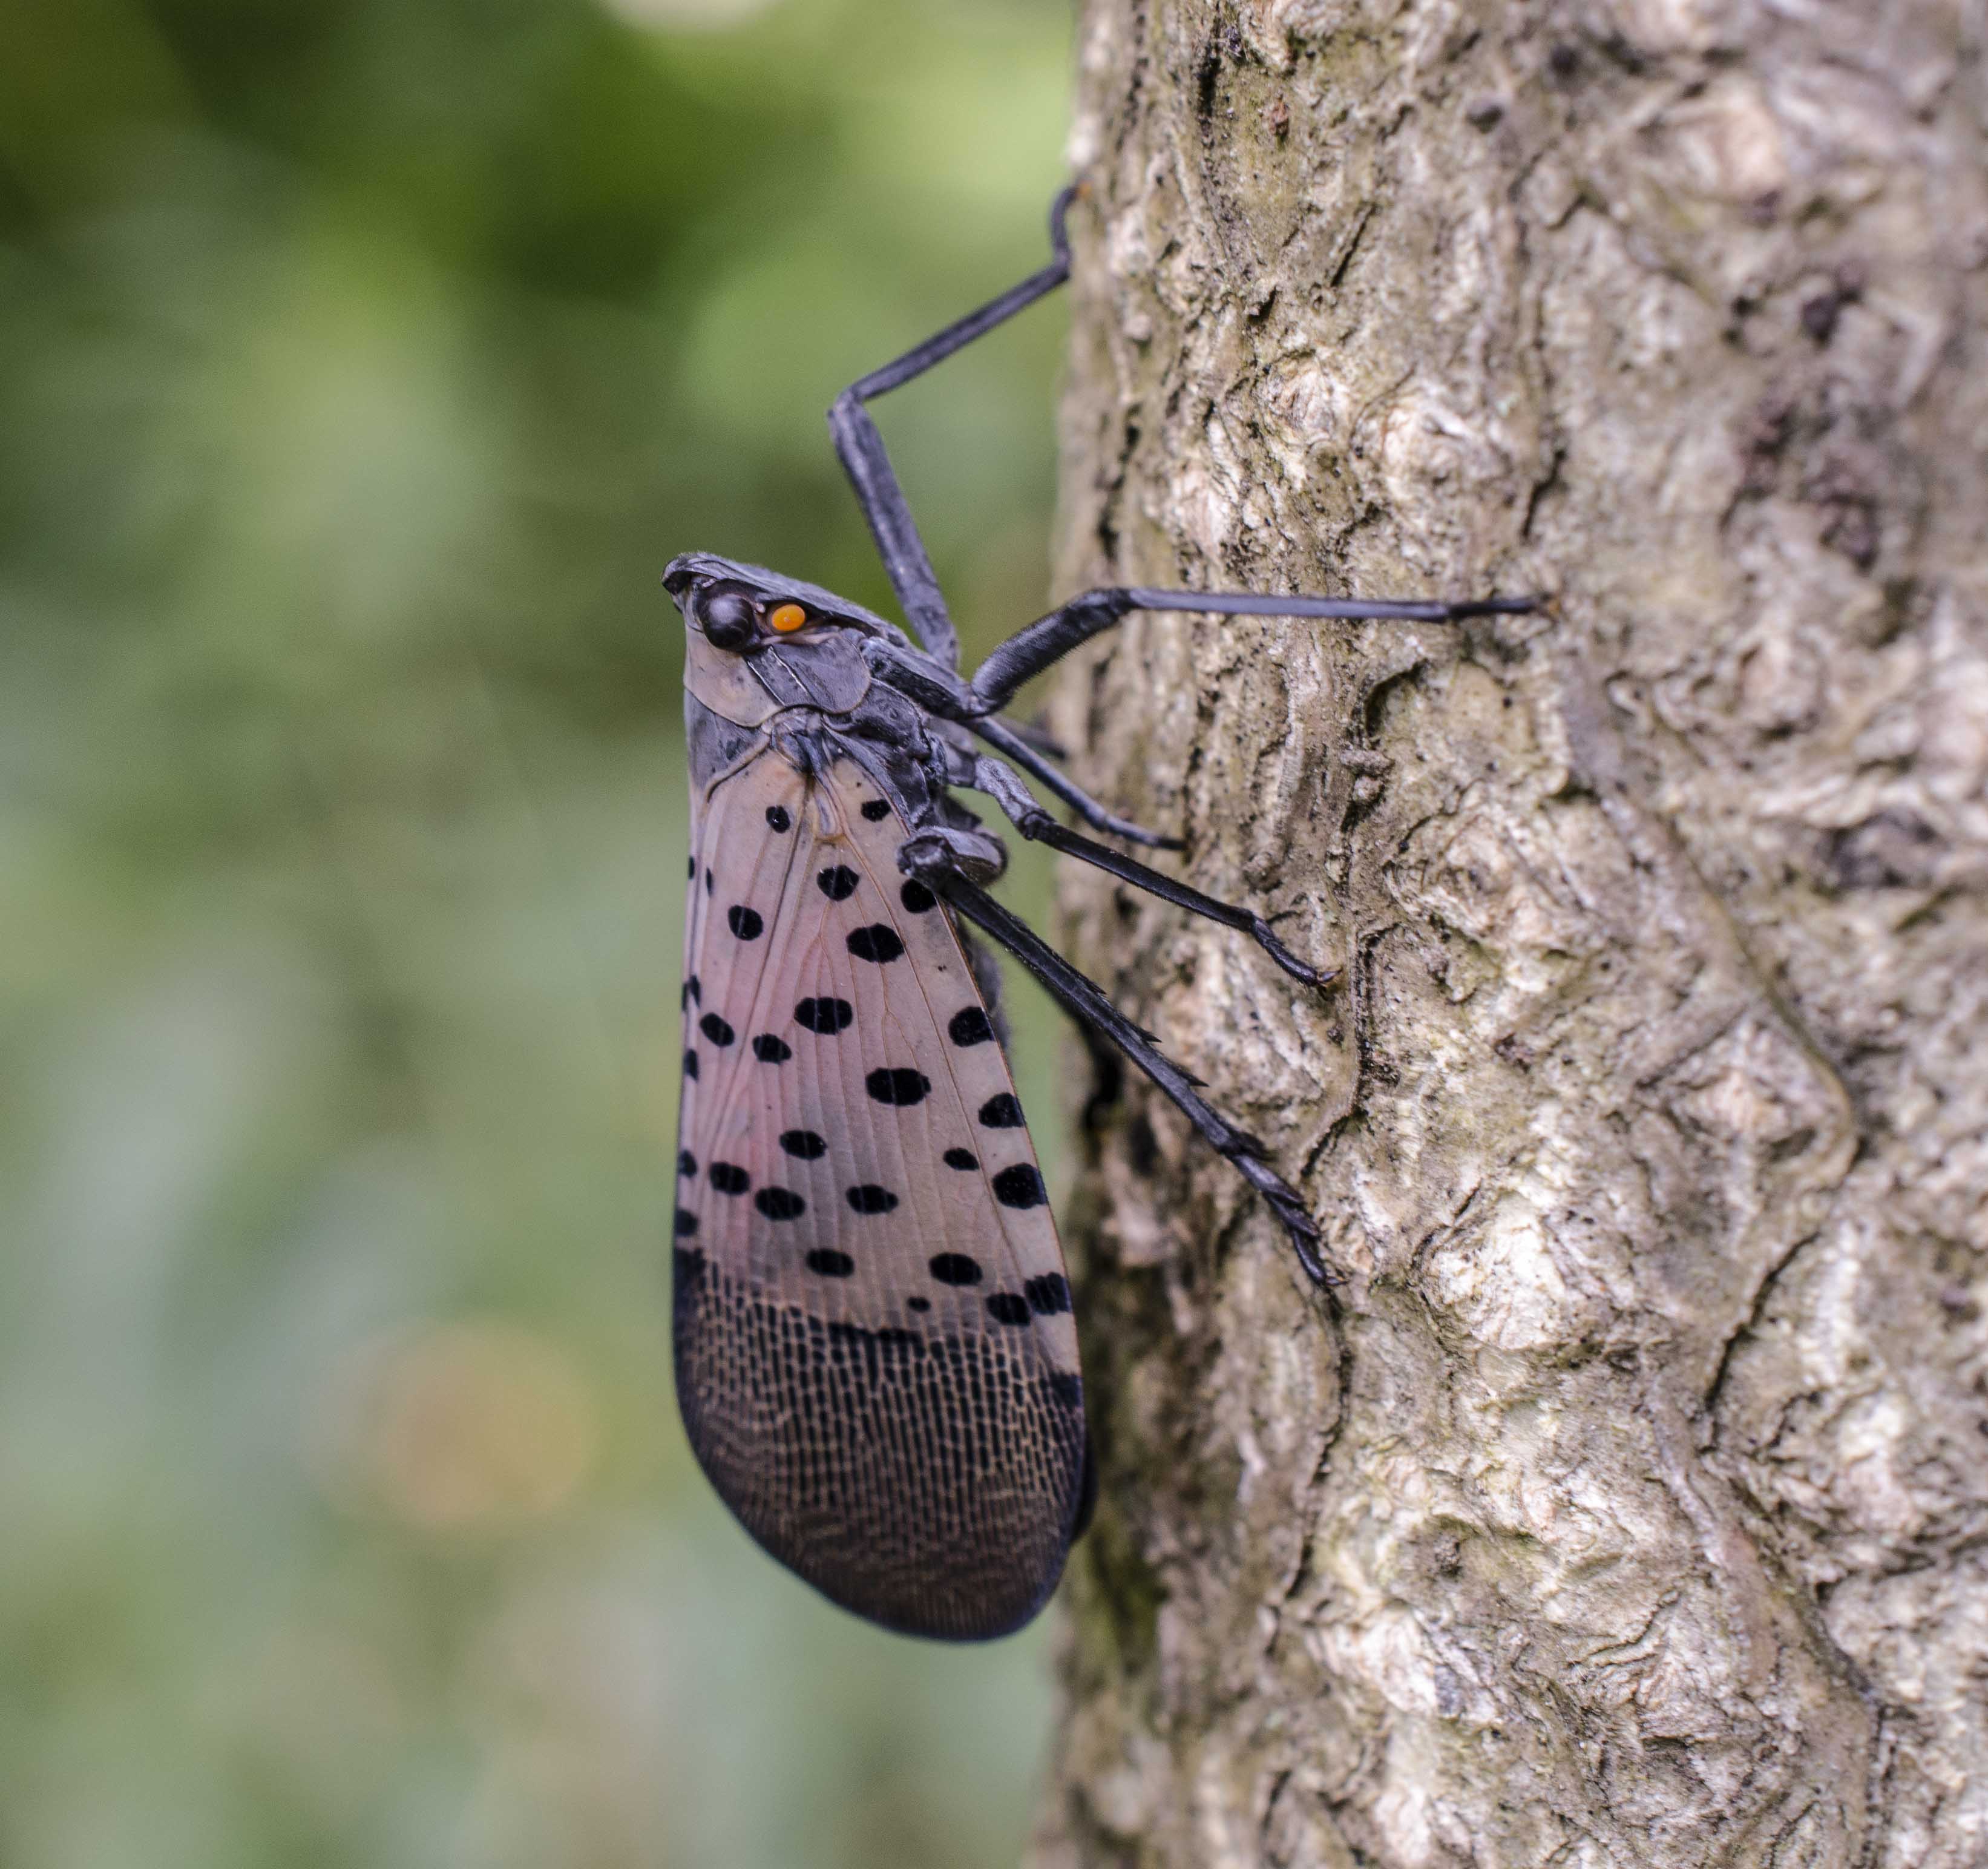 Spotted lanternfly, journal of wild culture, ©051620_1.jpg